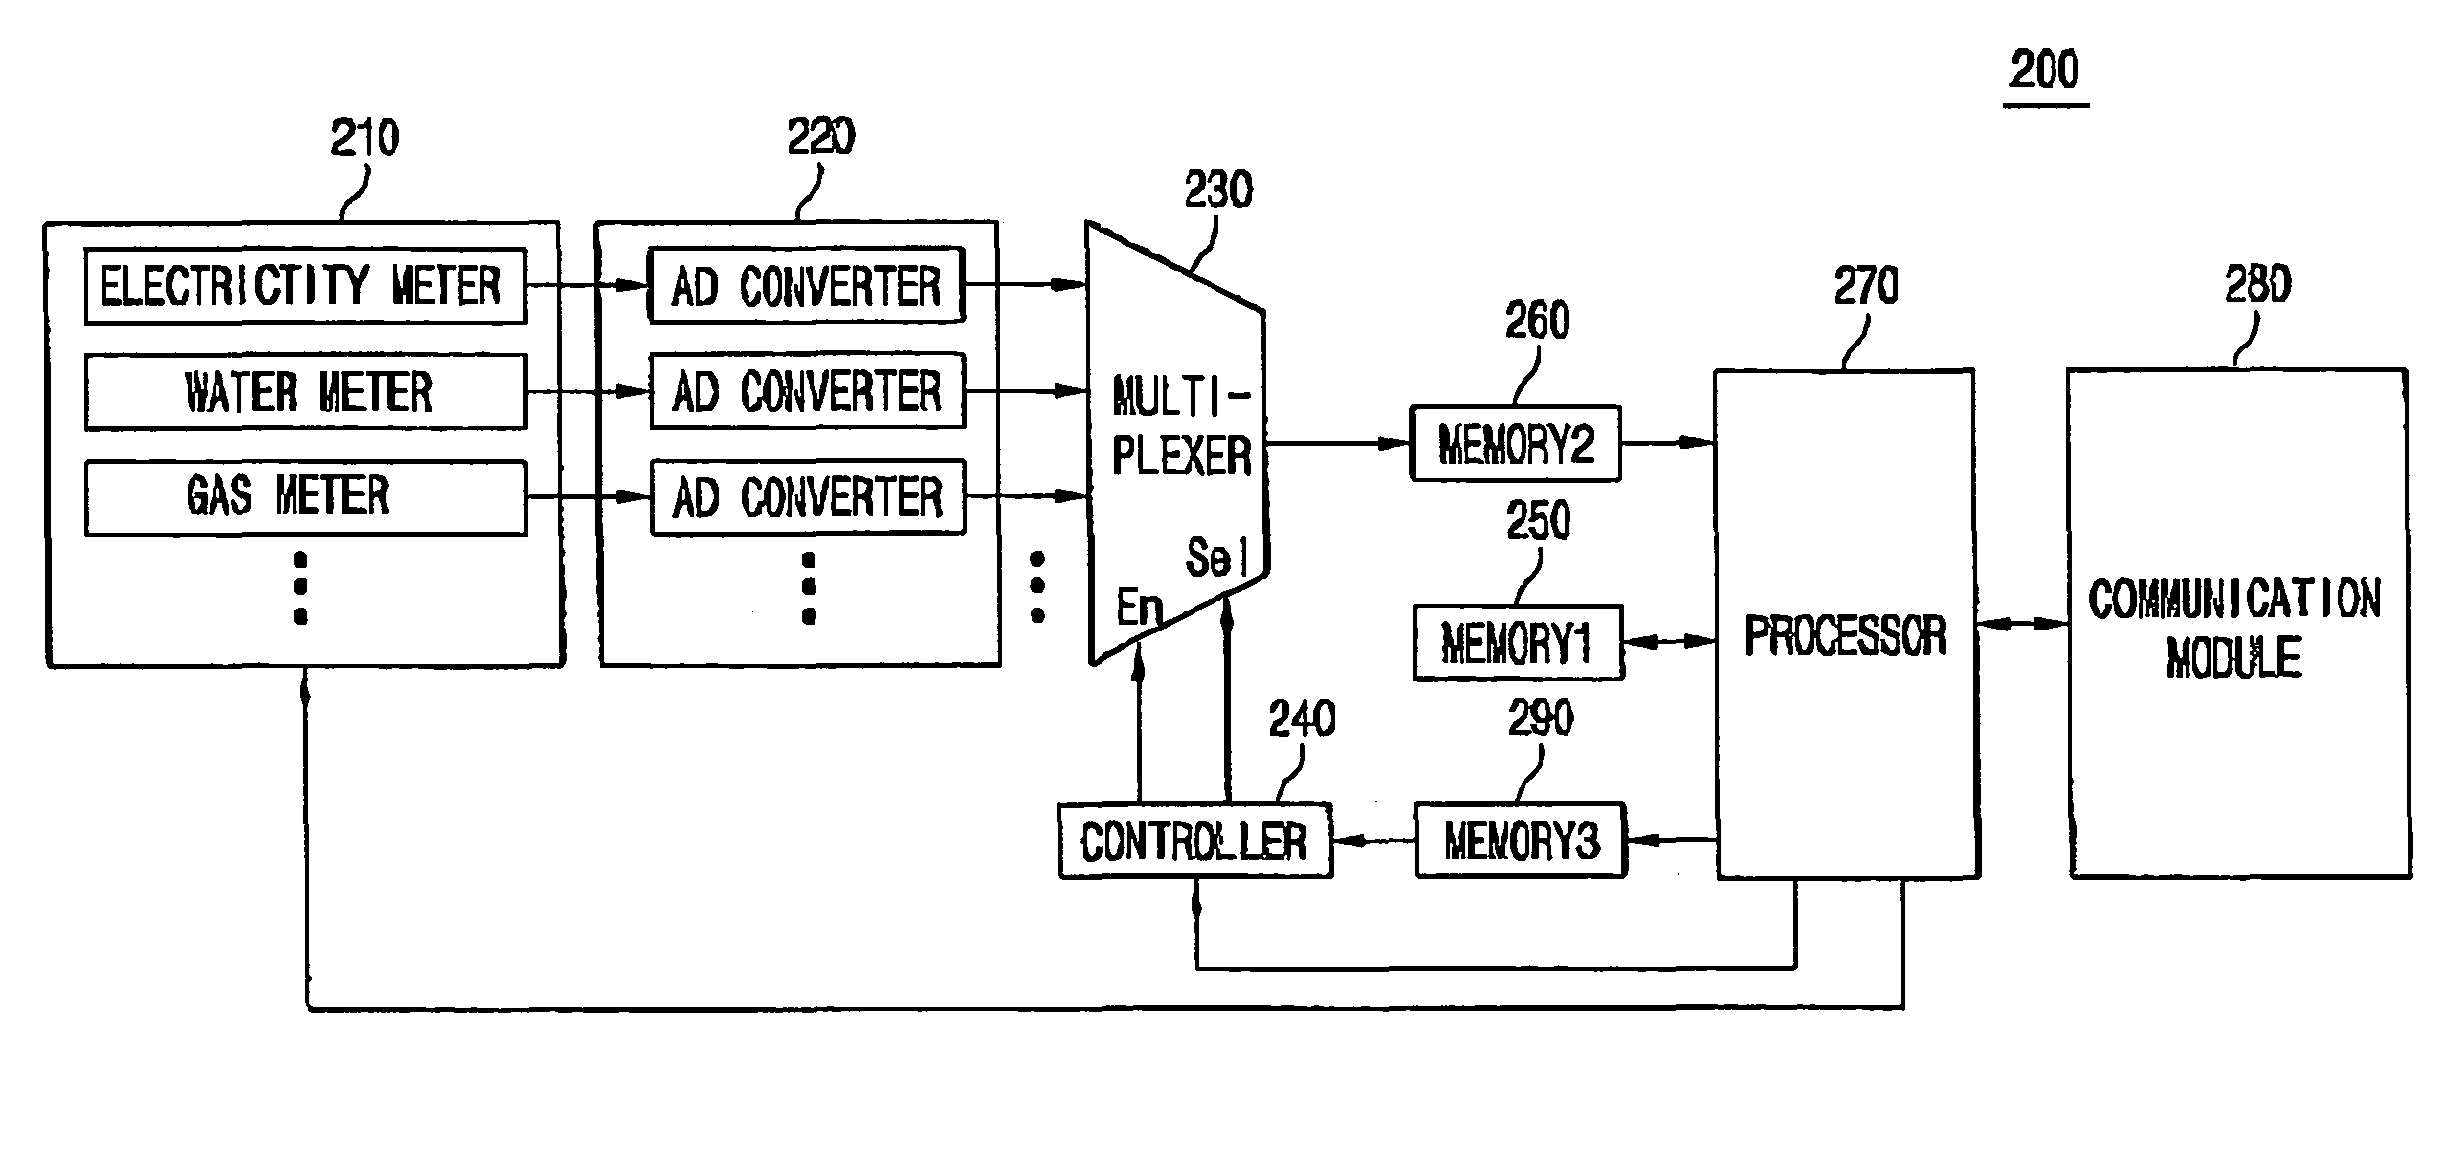 Mobile communication-based remote meter reading system and method